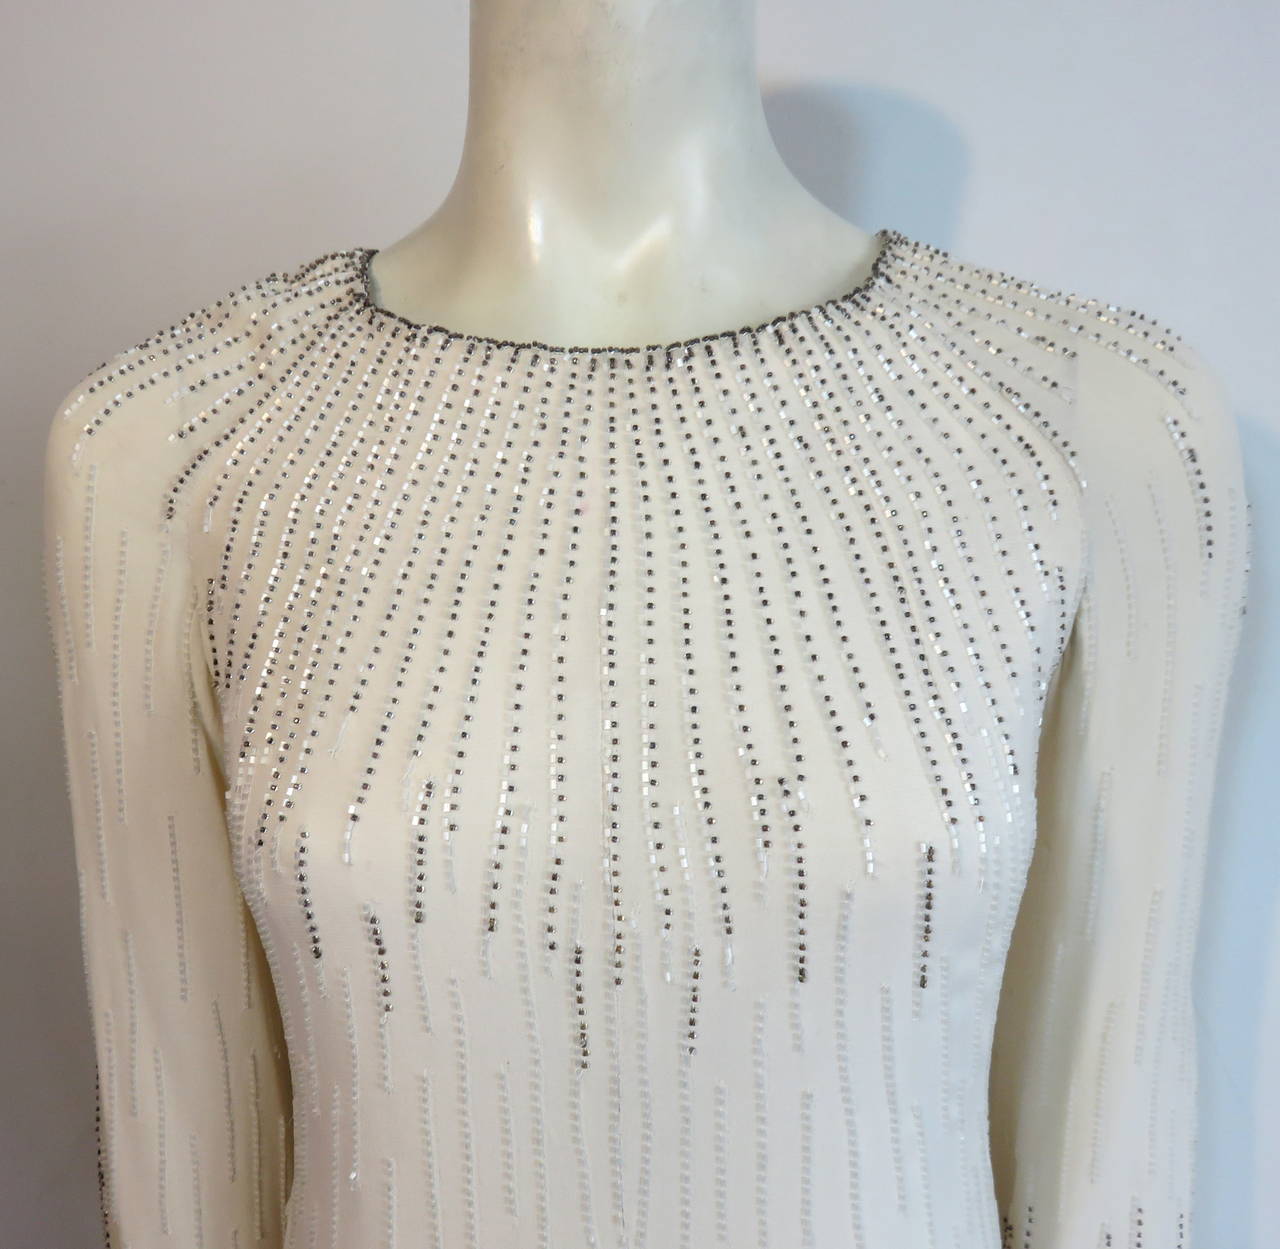 Beige 1970's GUY LAROCHE Haute Couture beaded evening gown dress For Sale